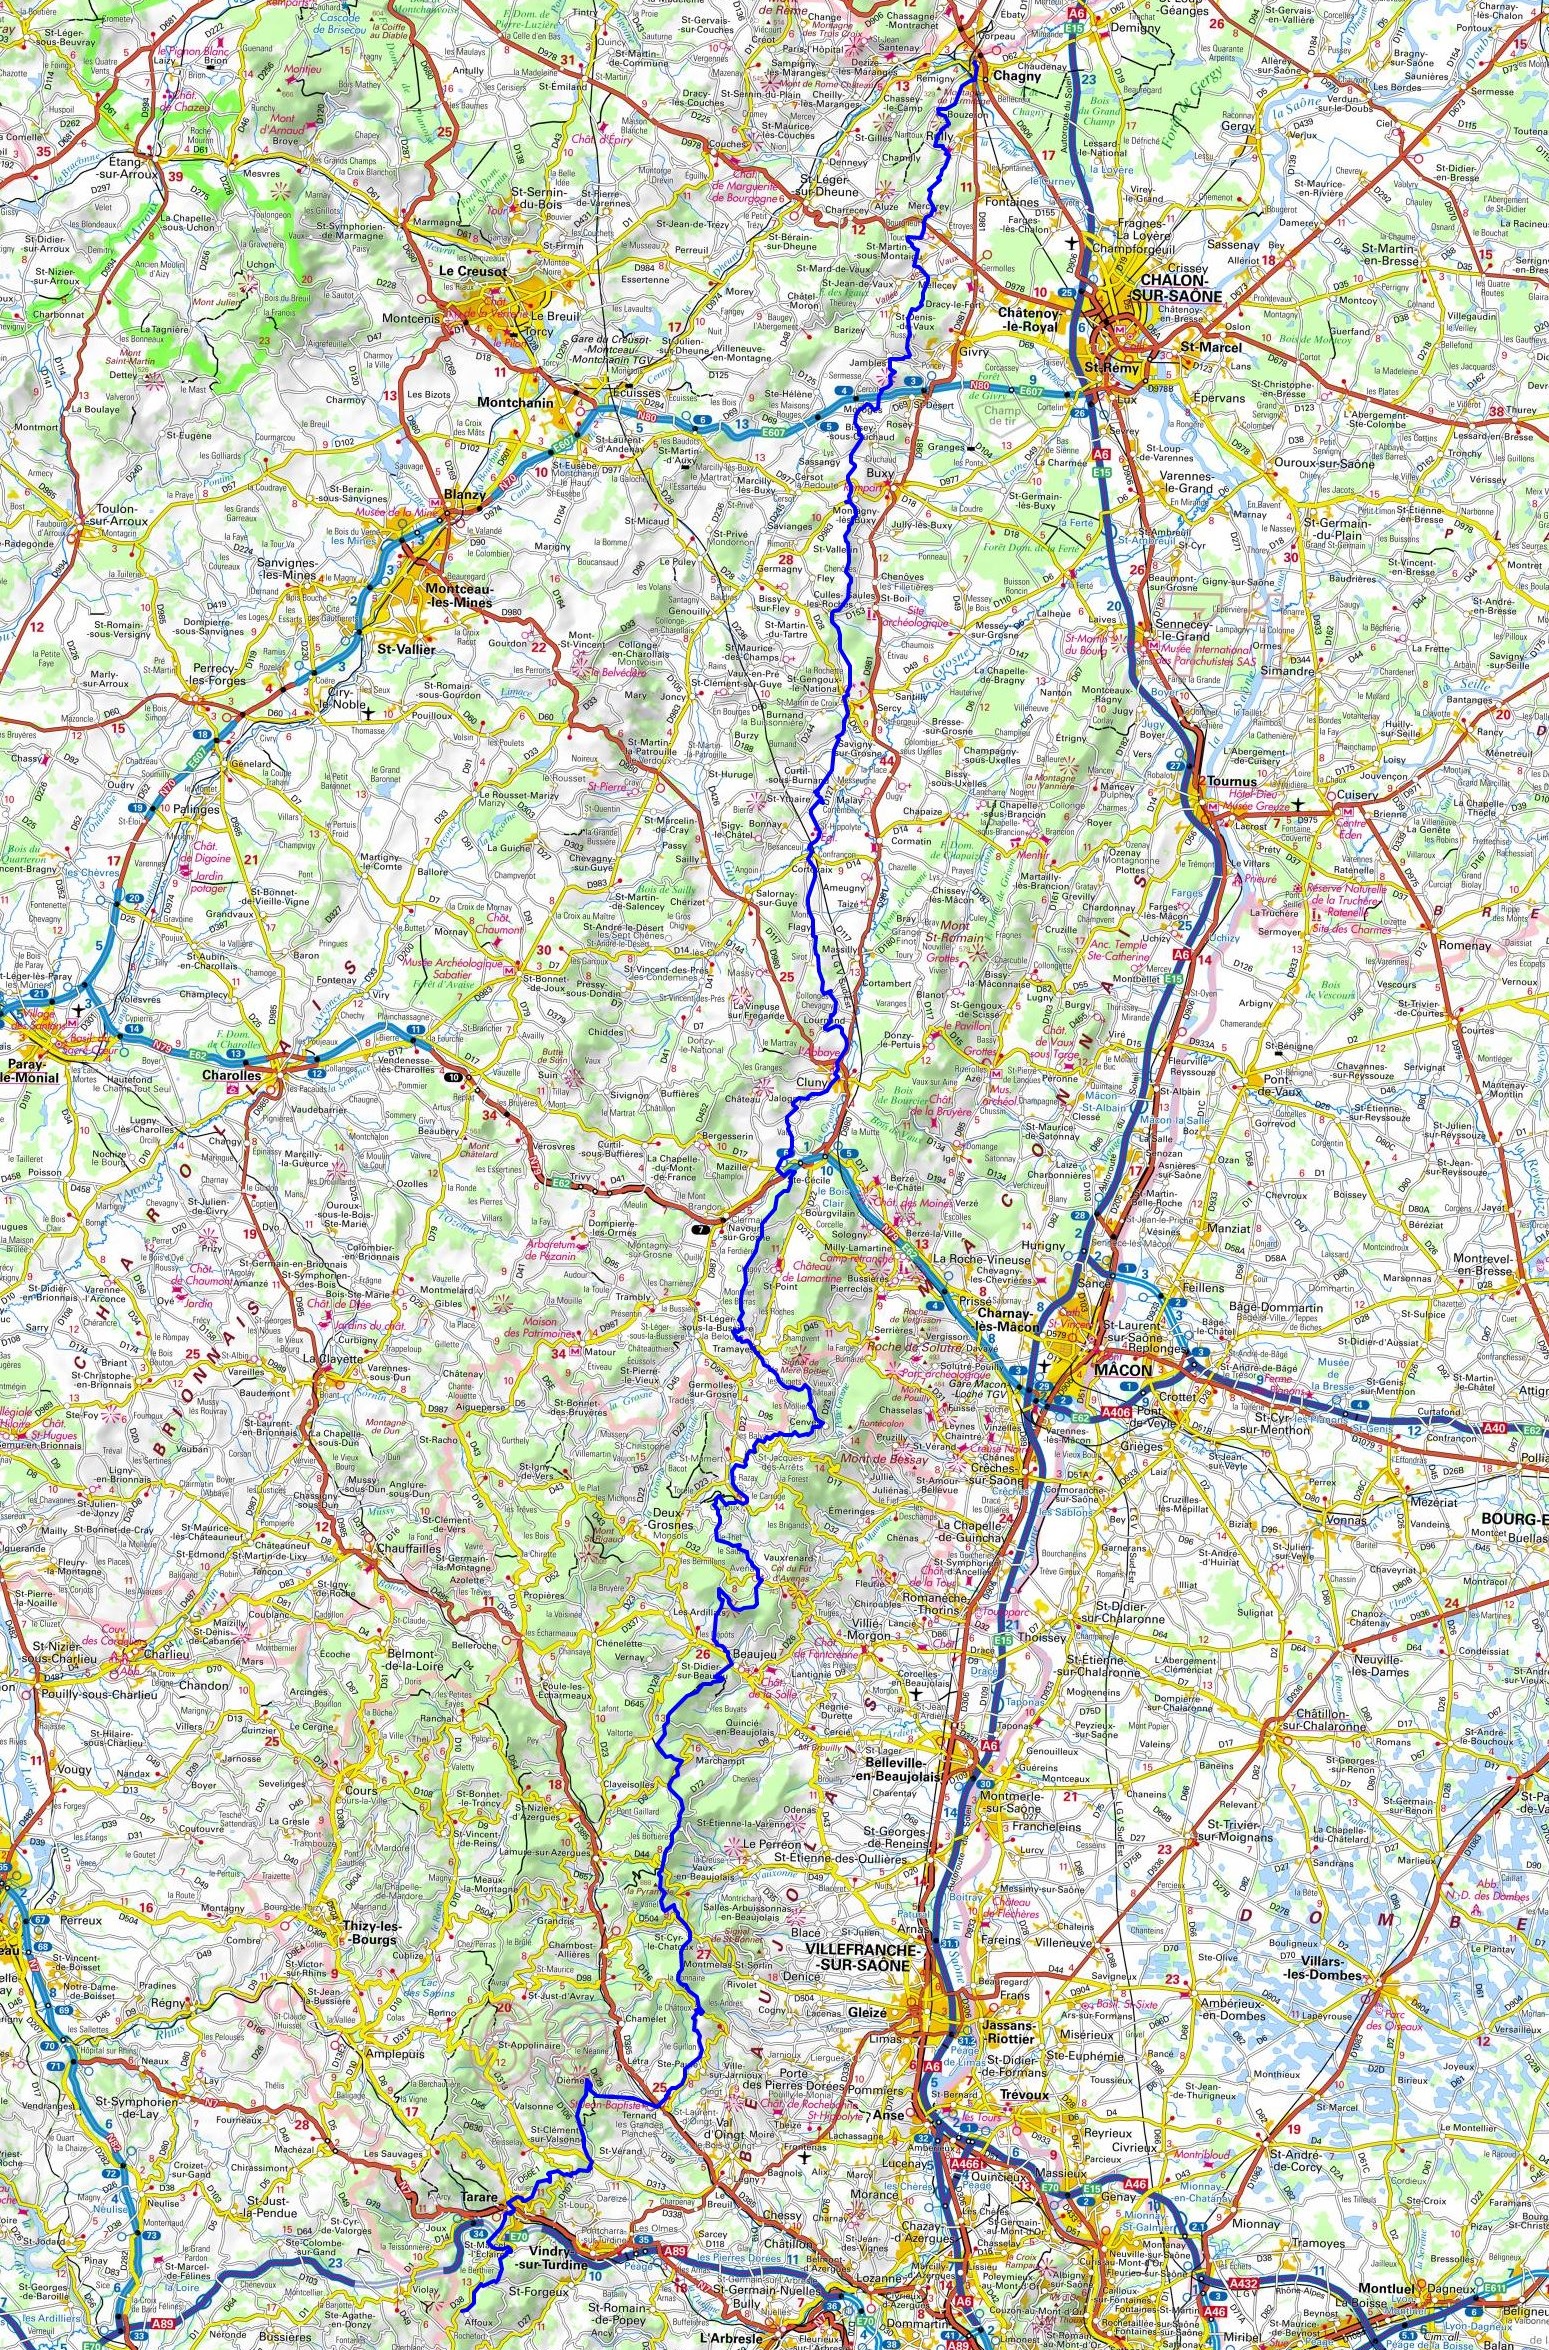 GR76 Hiking from Chagny (Saone-et-Loire) to Affoux (Rhone) 1